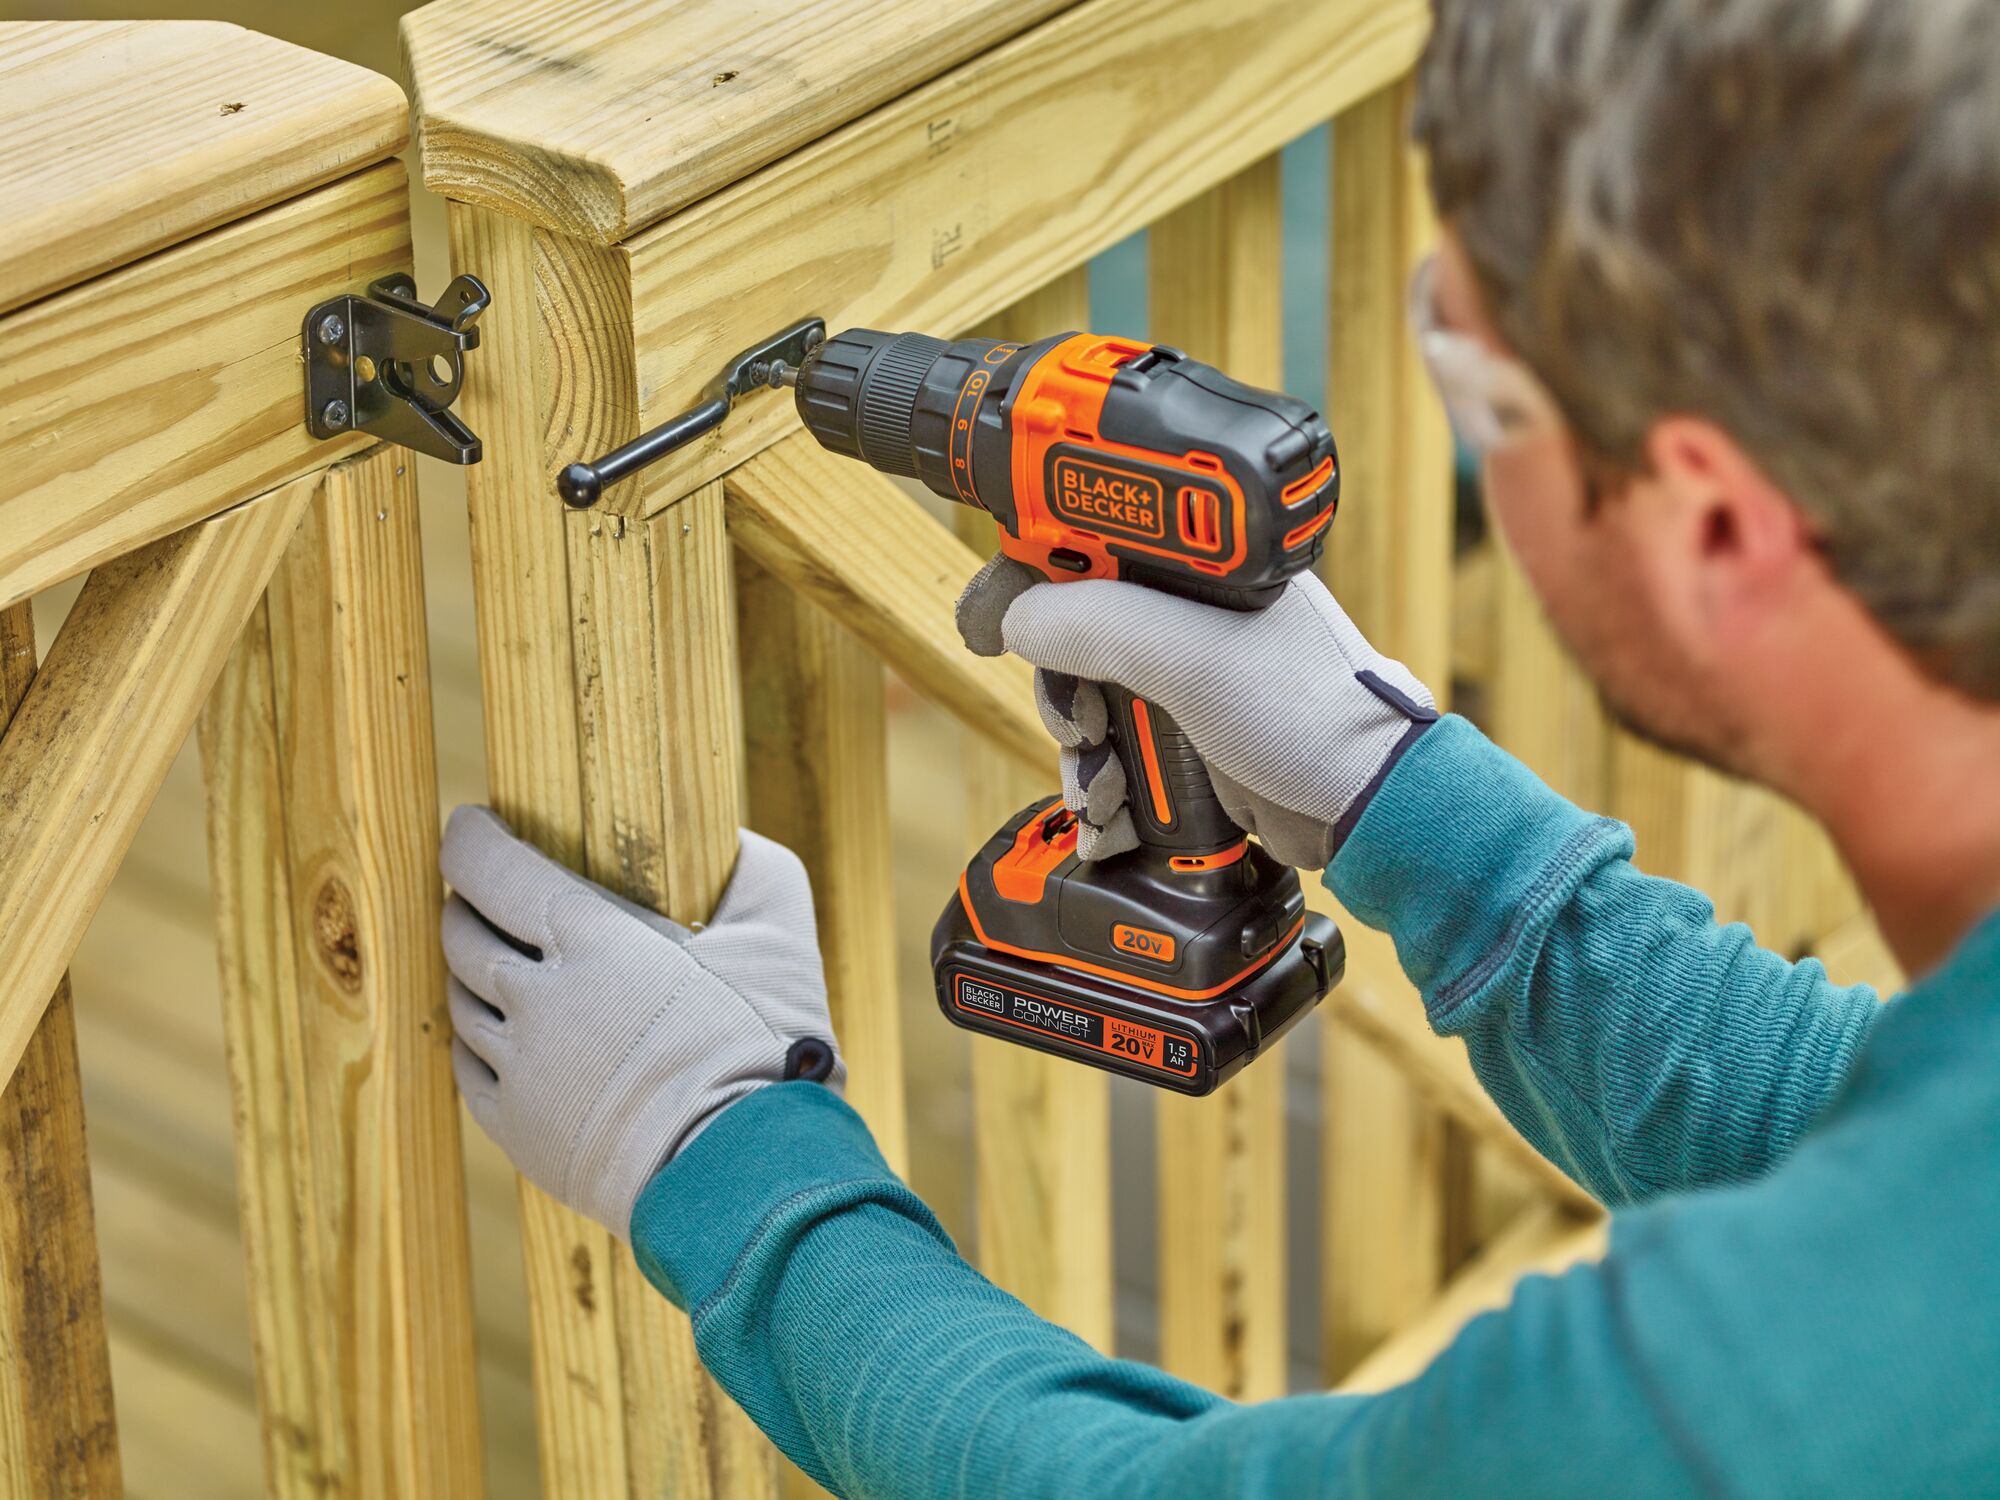 20 volt MAX lithium 2 speed drill driver being used by a person to fix a catch on wood.